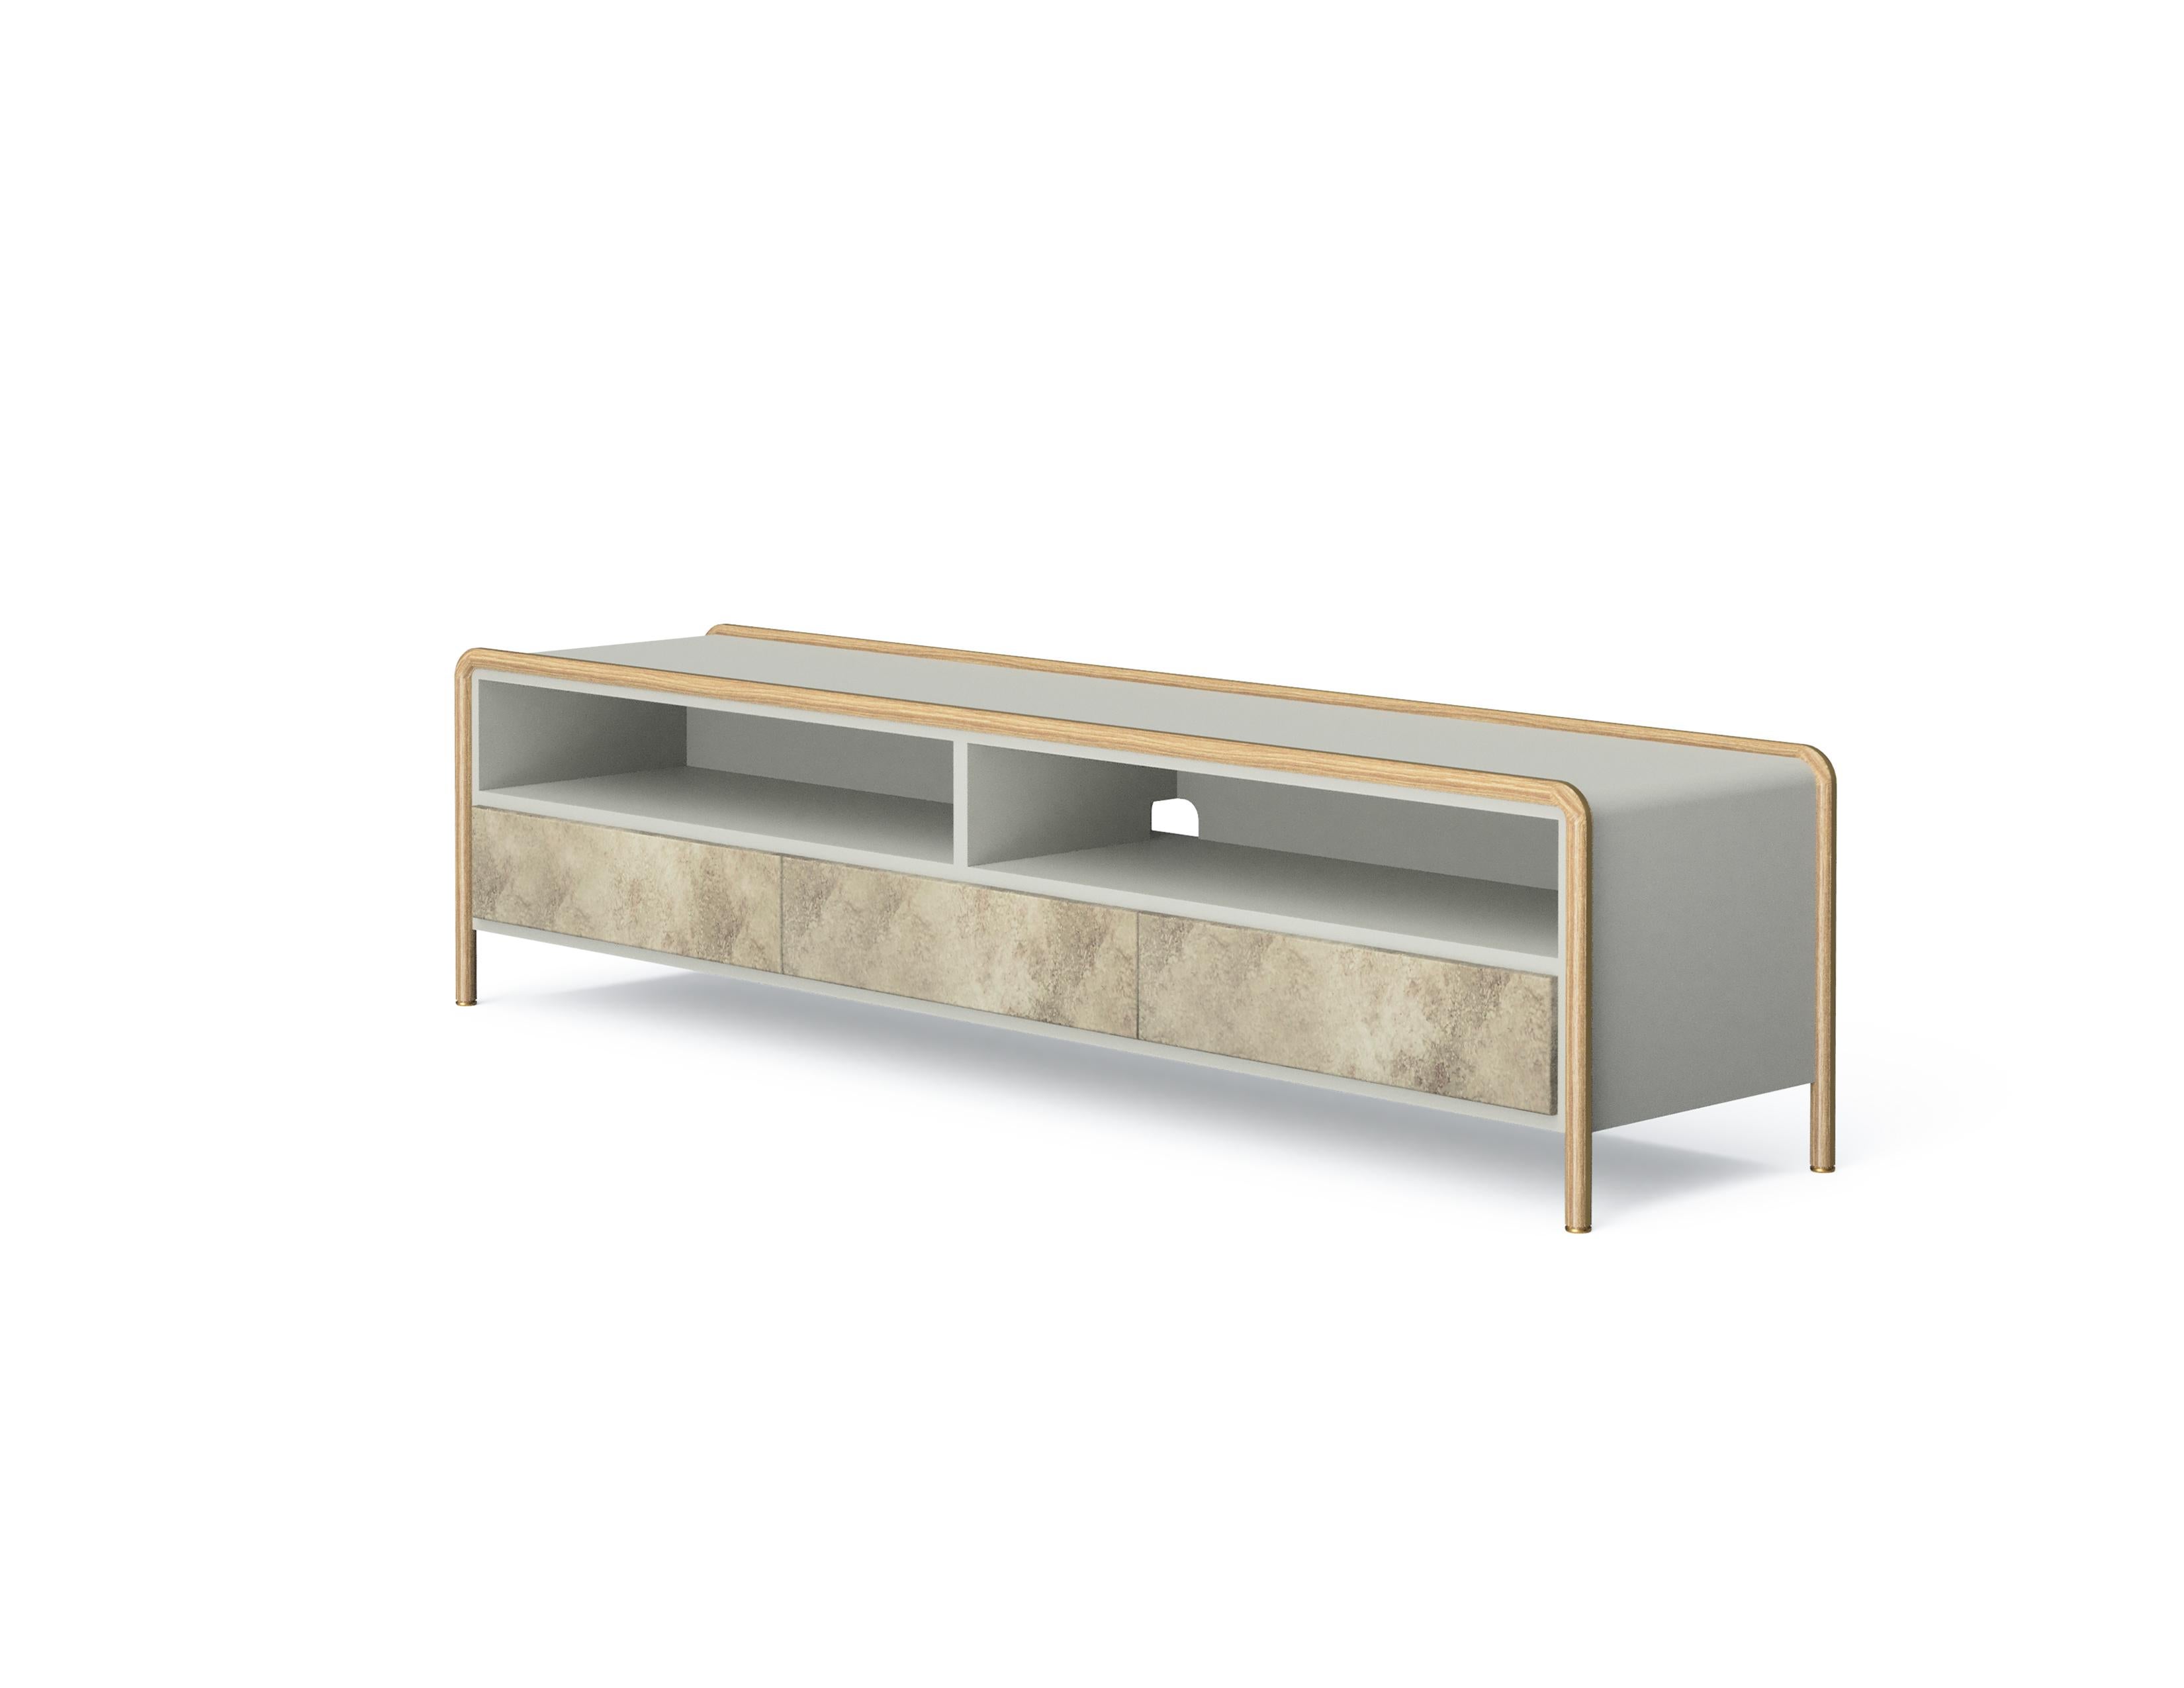 Manufactured using the woodturning technique, the solid wood , gently wraps around the top of the unit and come down to form the unit’s feet. The lacquered body adds serenity to ‘Sam’, which has versions with drawers and sliding doors.
‘Sam TV